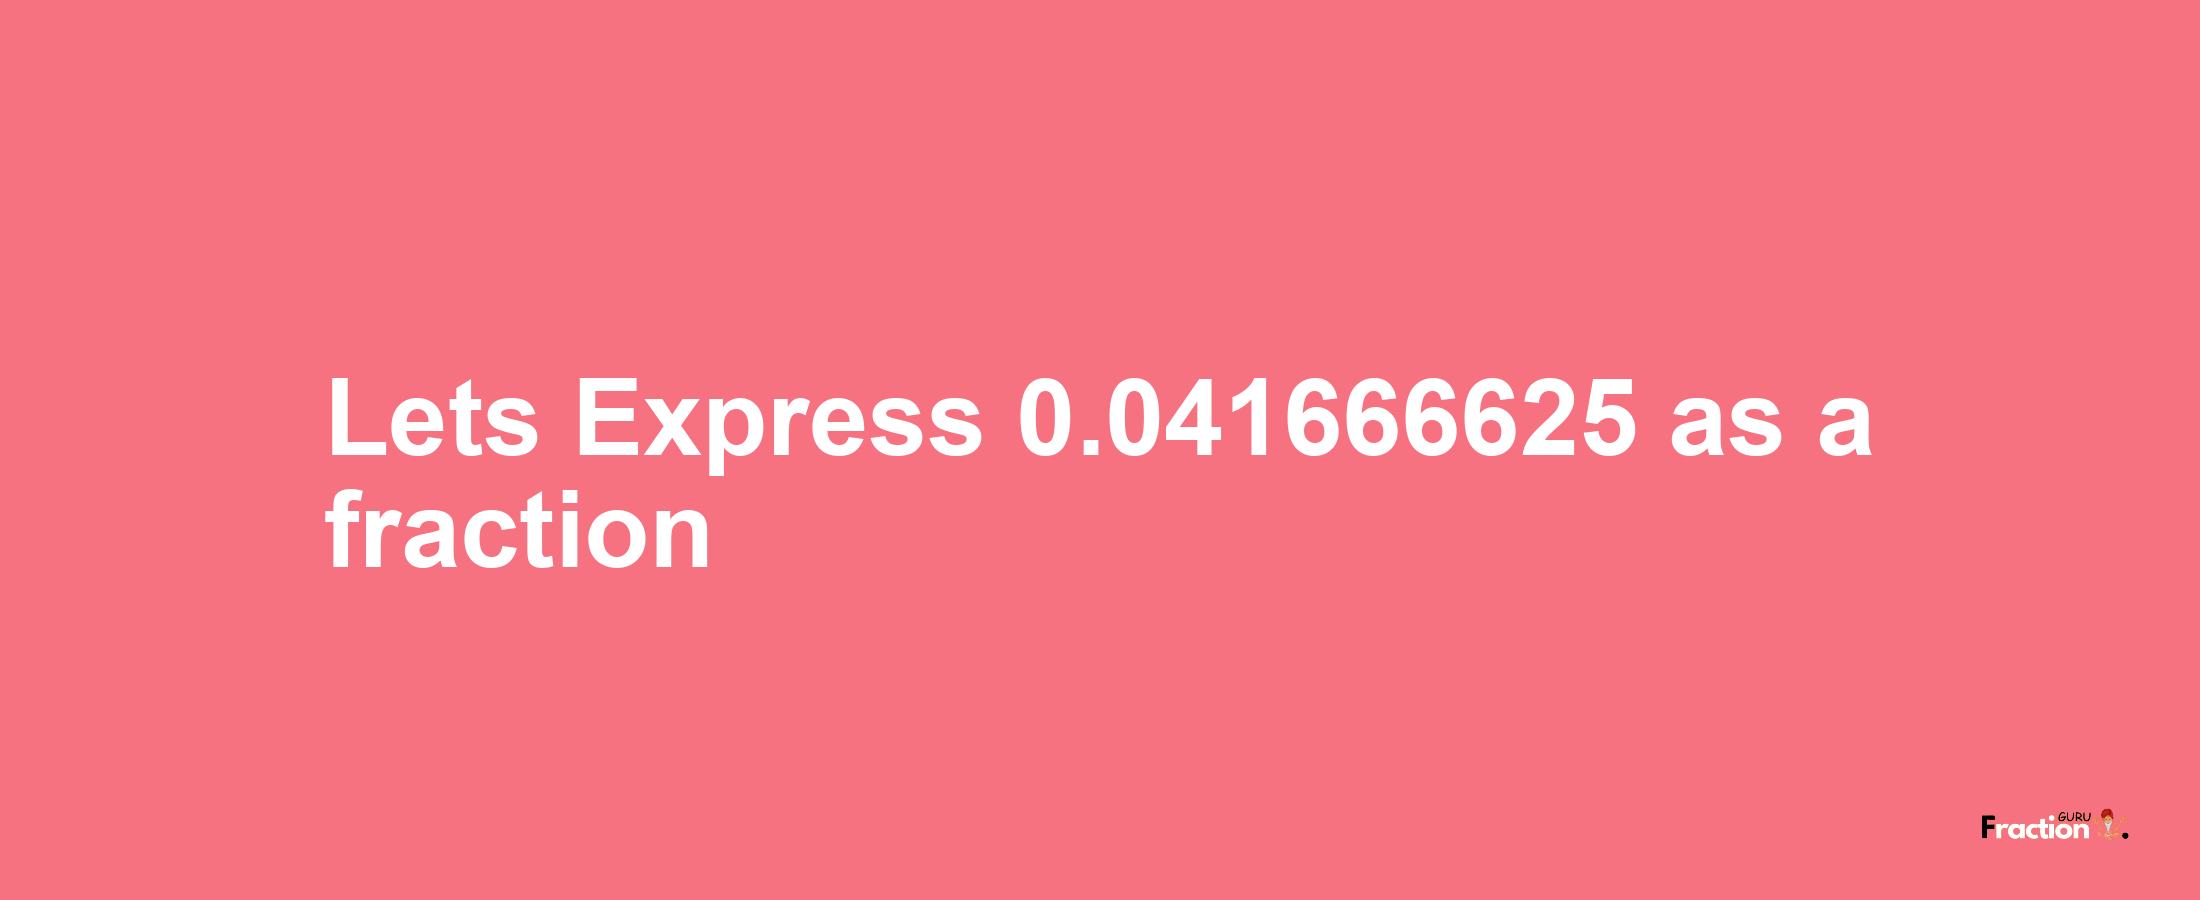 Lets Express 0.041666625 as afraction